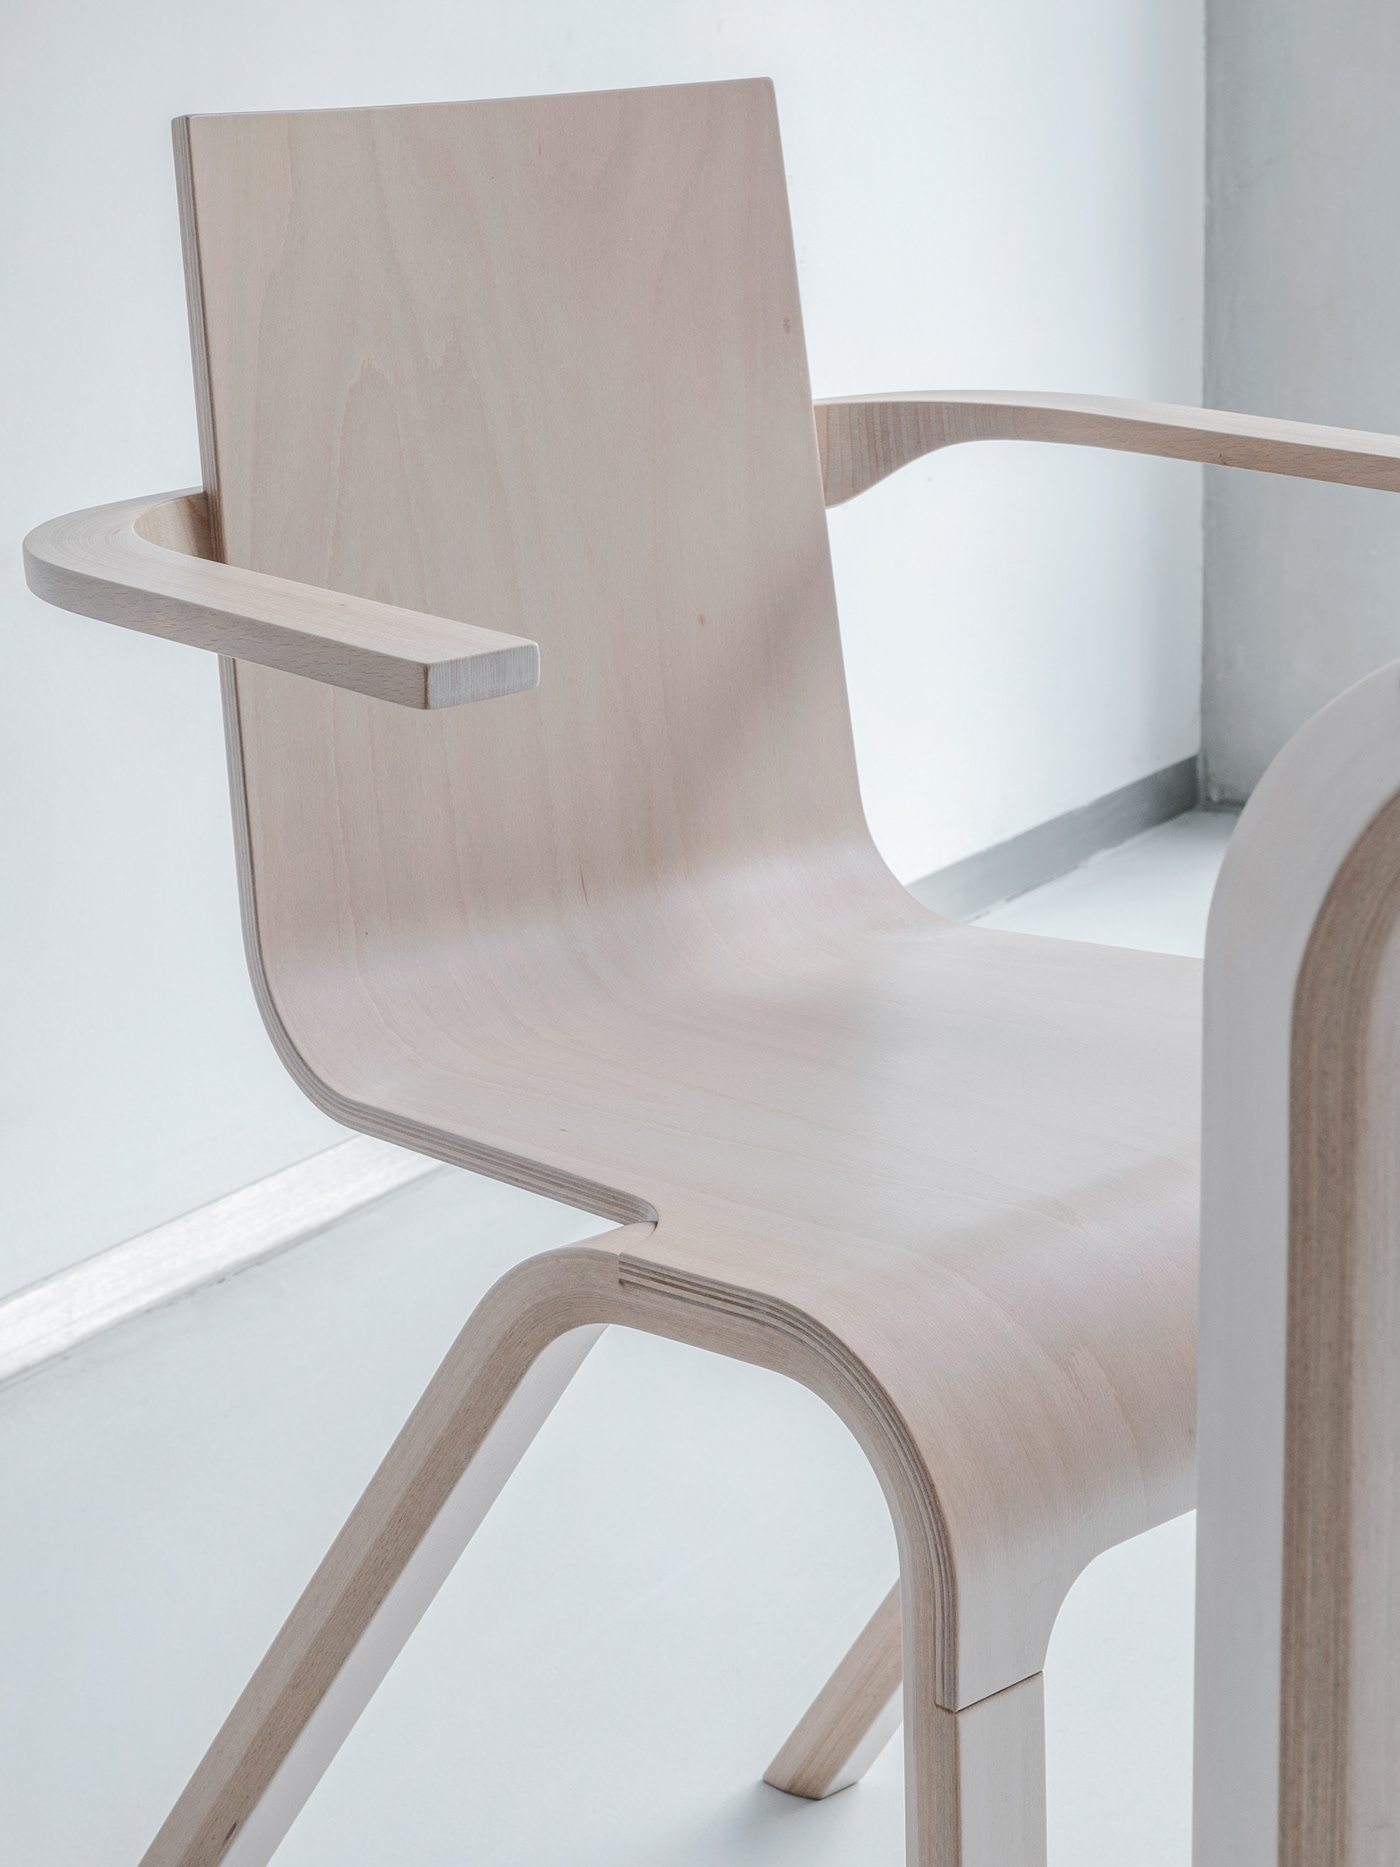 bent cantilevered chair contract furniture plywood Stackable